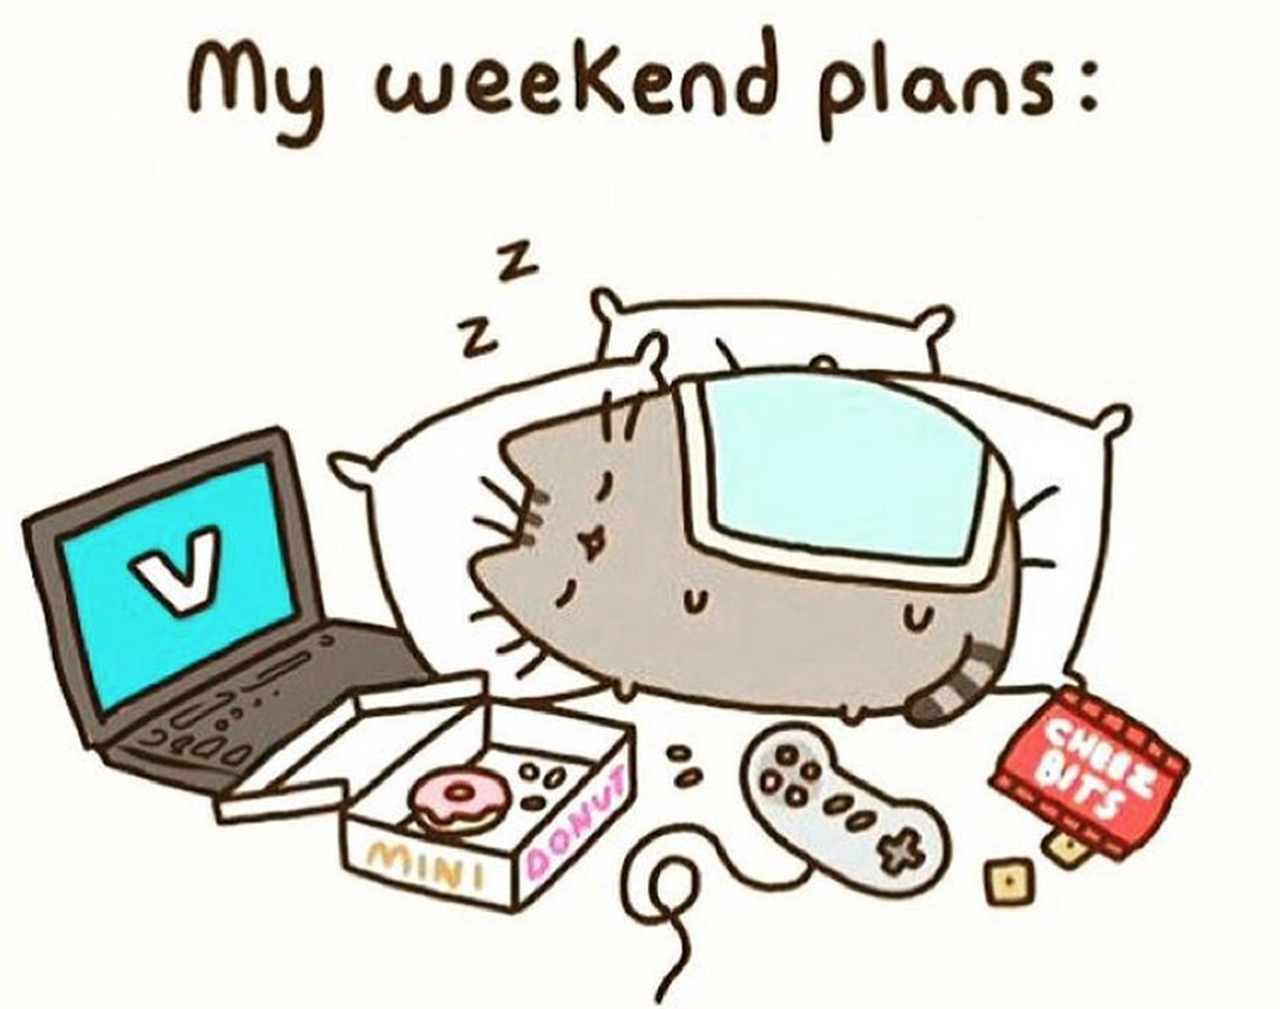 How you spend weekends. My Plans for the weekend. Plans for the weekend. My weekend презентация. Weekends картинки.